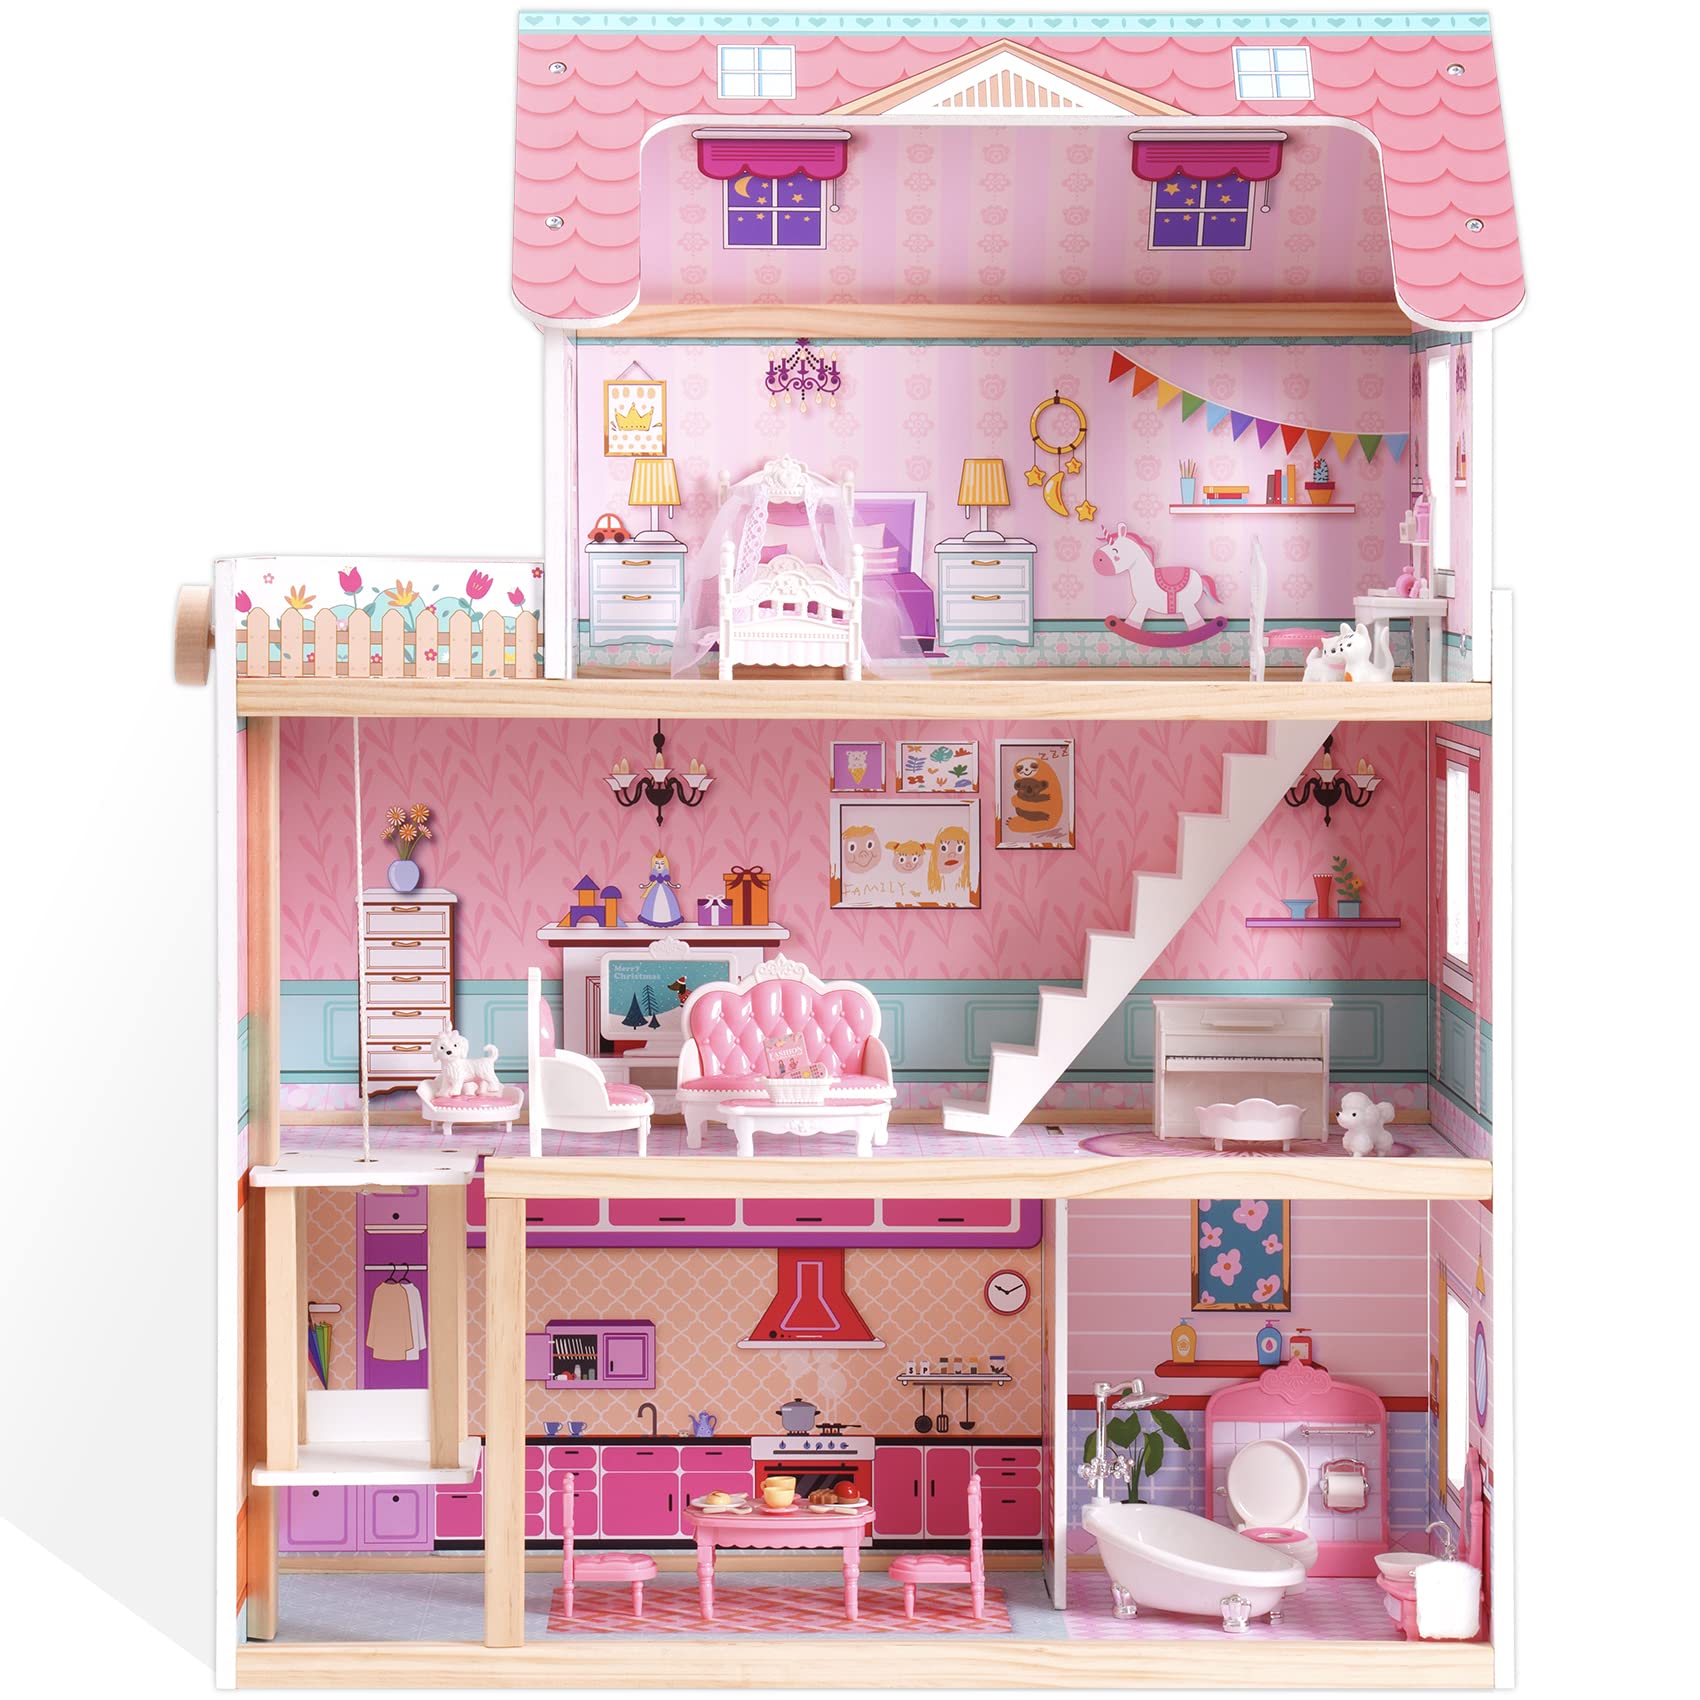 ROBUD Wooden Dollhouse Kit for Kids, Dollhouse Toy Gift for 3 4 5 6 Year Old Girls Boys